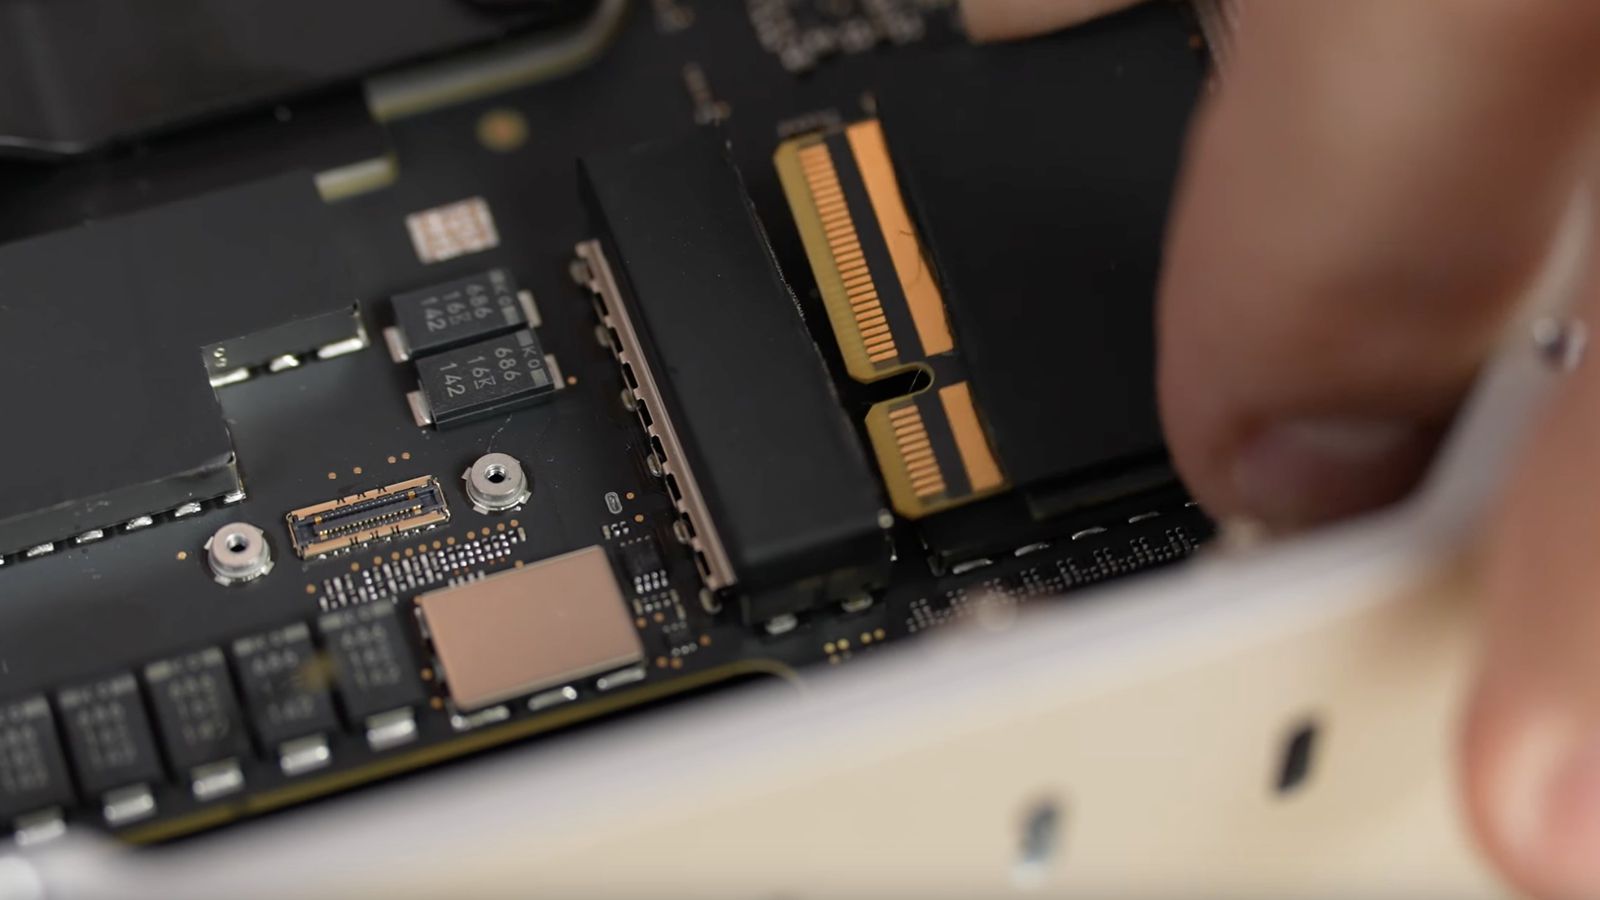 sew chilly diet Mac Studio Teardown Indicates That SSD Storage May Be Upgradeable -  MacRumors